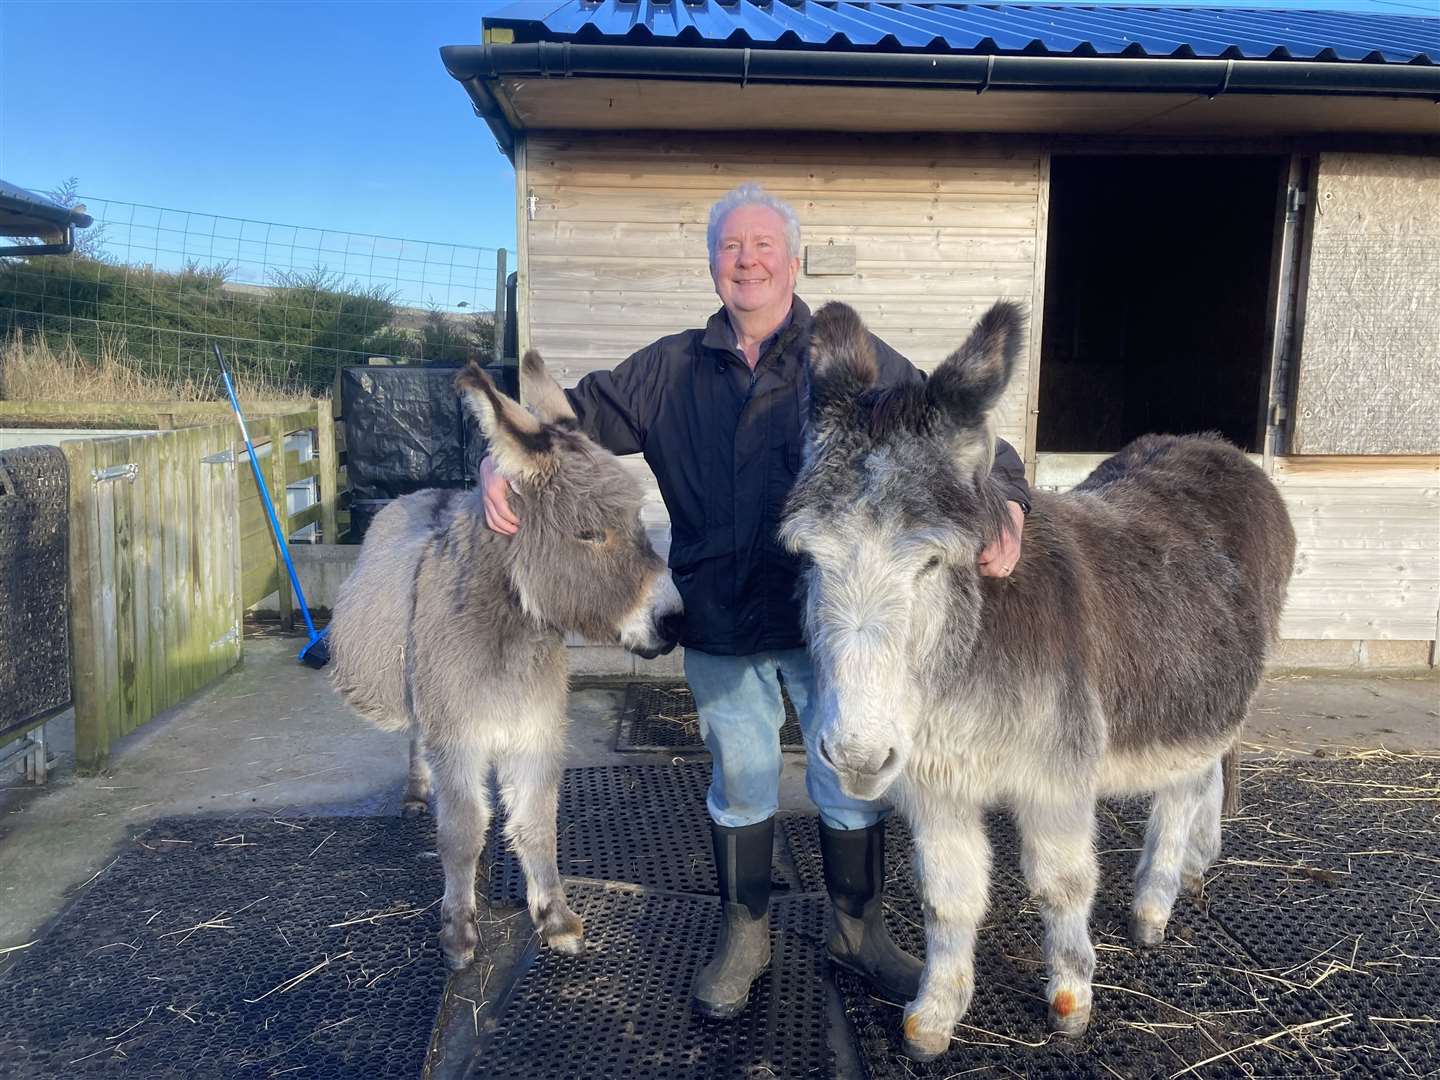 Mike with Bob and Raffles. Pictre: The Donkey Sanctuary.